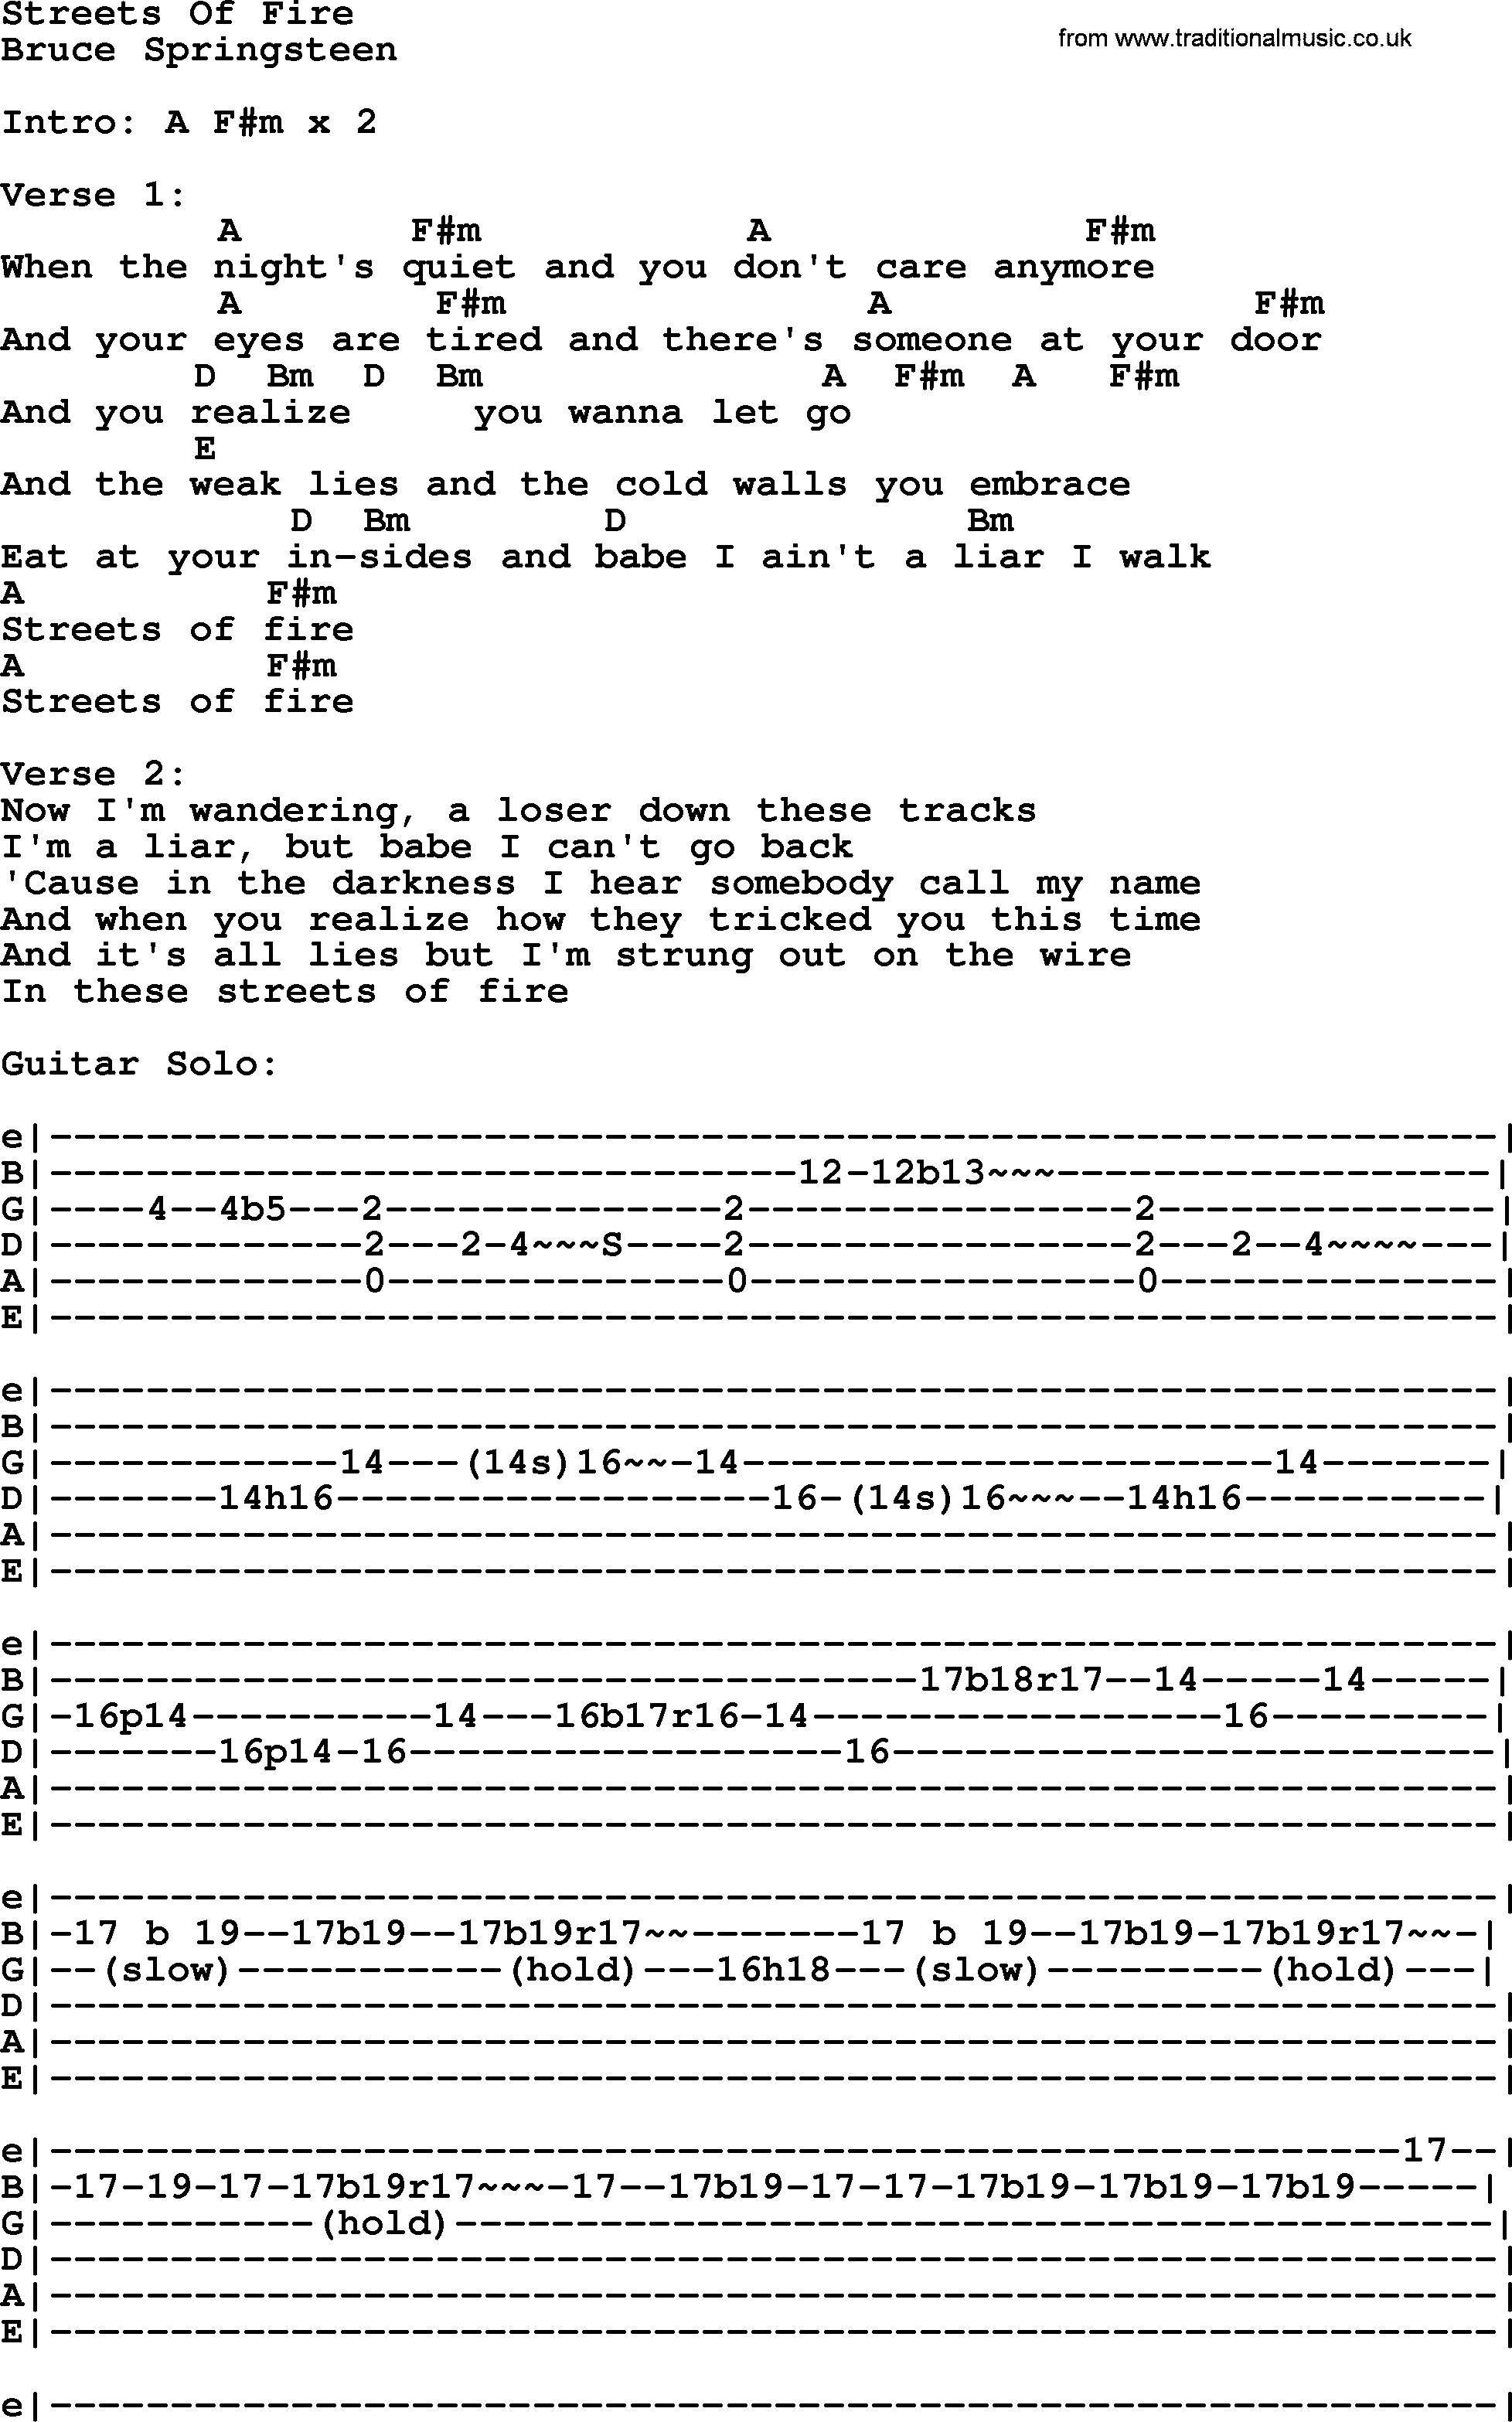 Bruce Springsteen song: Streets Of Fire, lyrics and chords